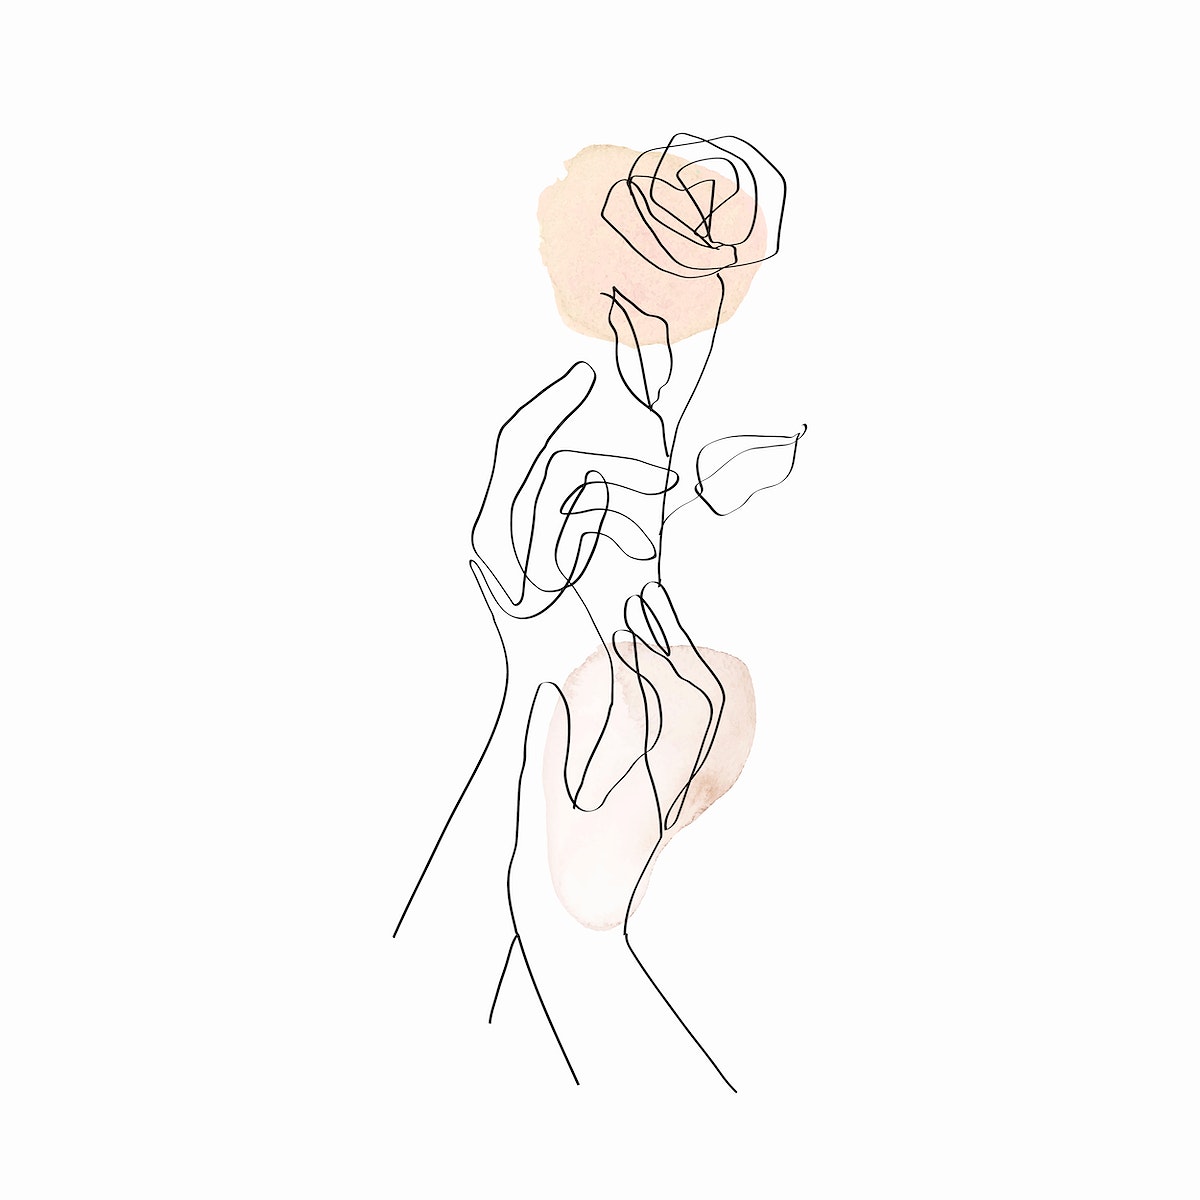 A minimalist line art illustration of a woman's hands holding a rose. - Abstract, art